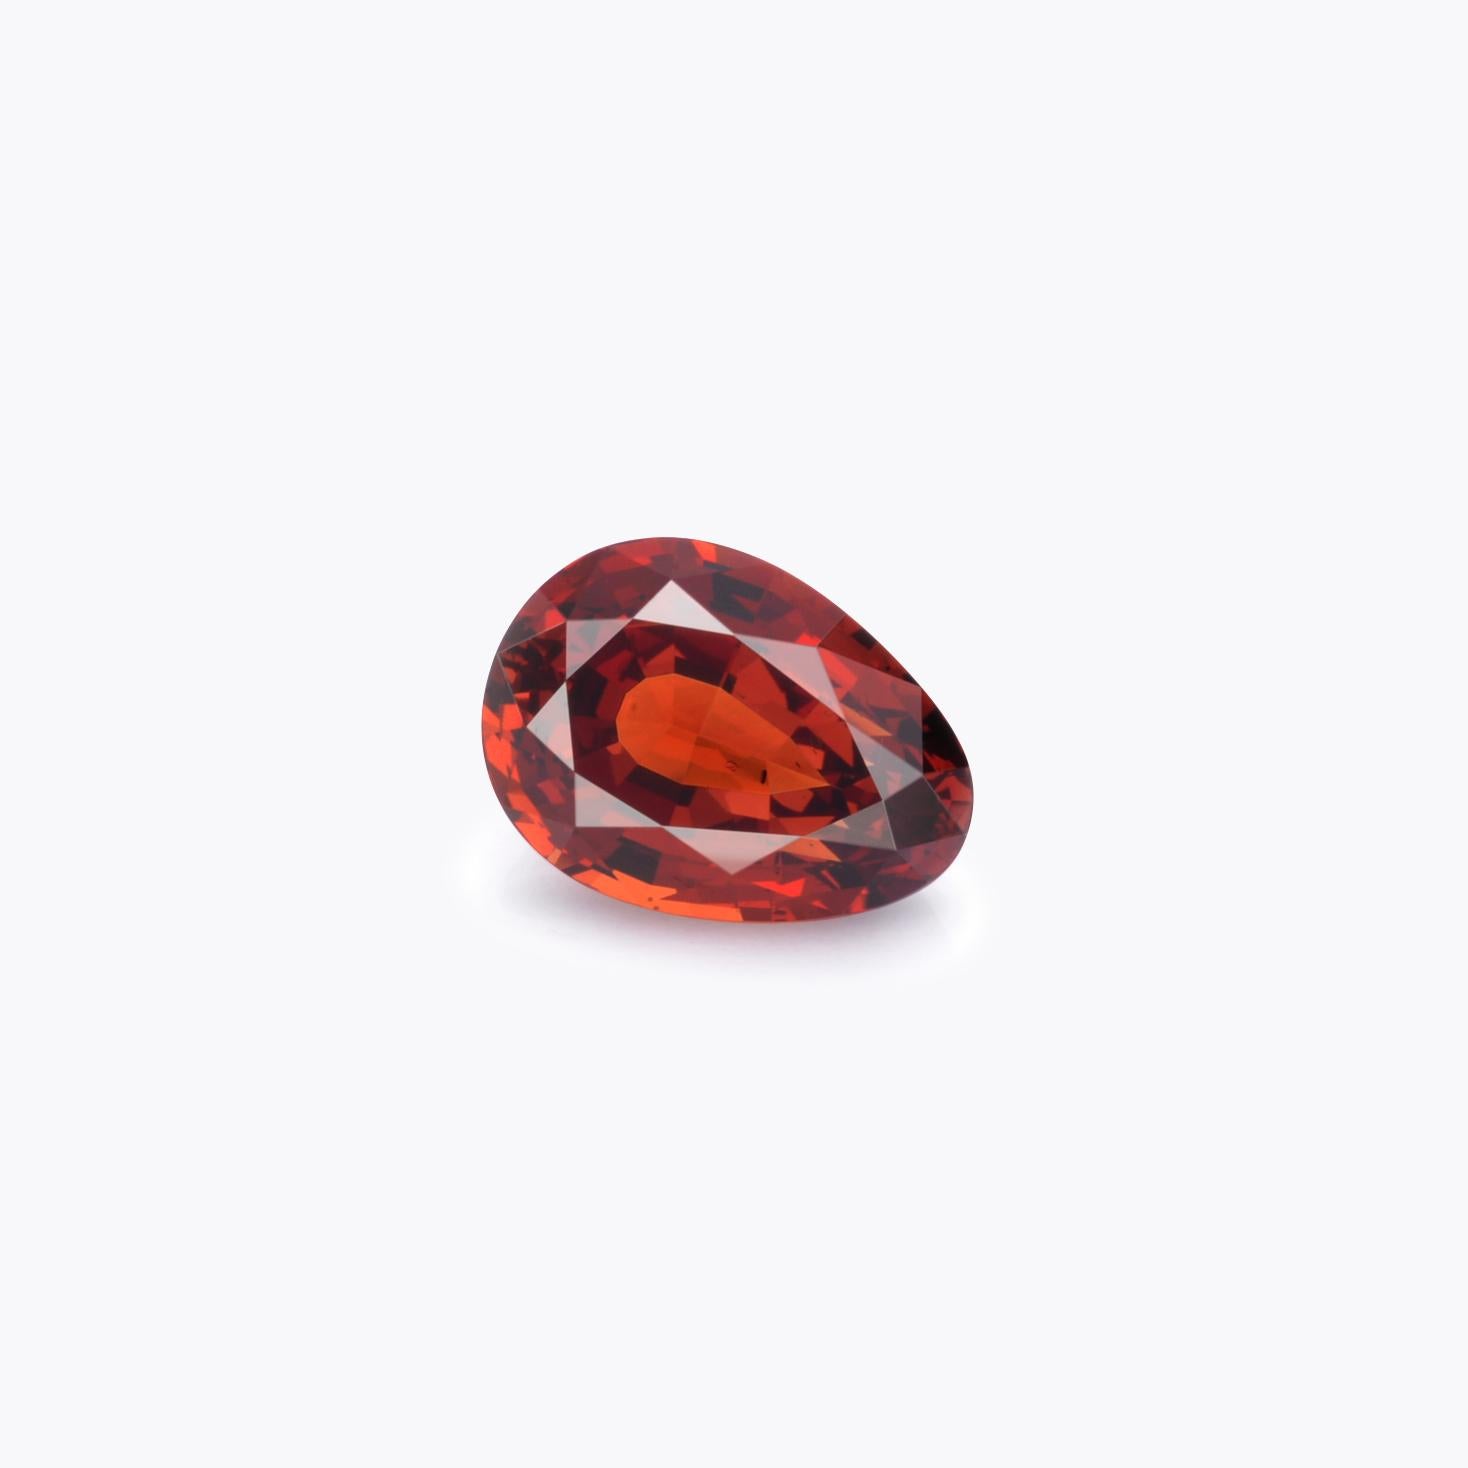 Gorgeous 6.74 carat Spessartite Garnet gemstone, offered unmounted to a fine gem connoisseur. 
Dimensions: 12.5 x 9.2 x 7mm.
Returns are accepted and paid by us within 7 days of delivery.
We offer supreme custom jewelry work upon request. Please